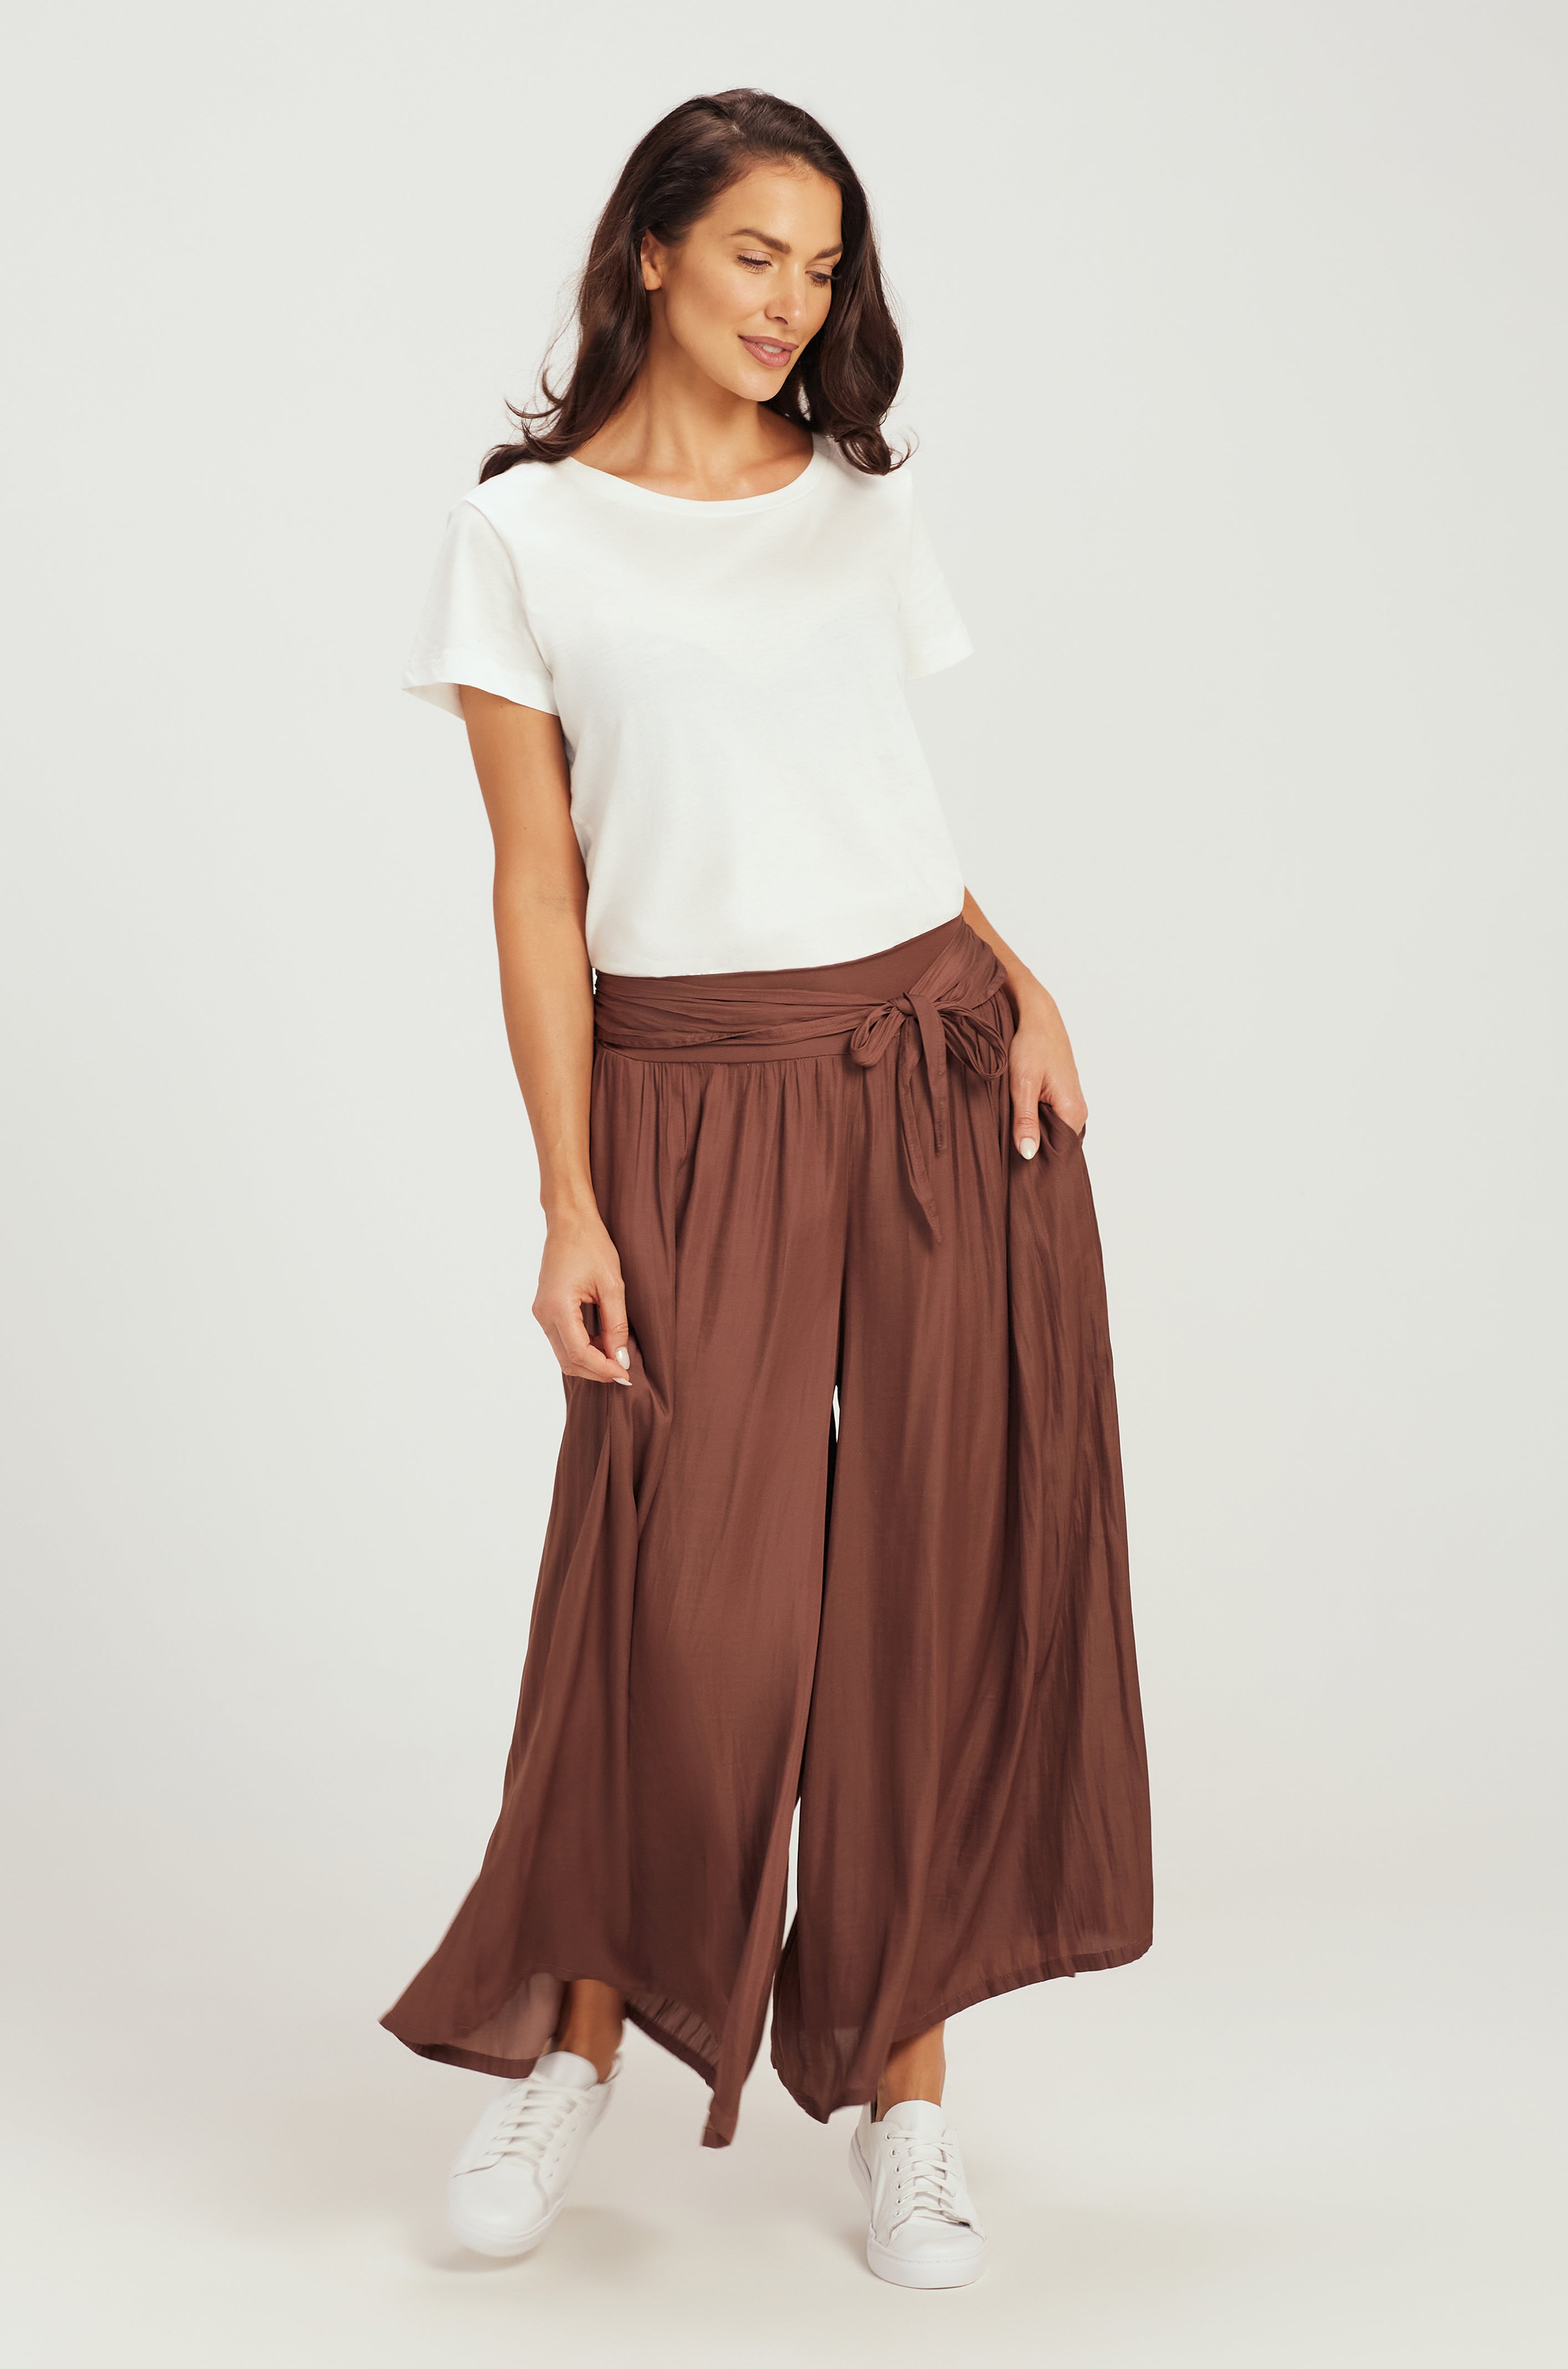 SKIRT PANTS / CHOCOLATE / PRE ORDERS ONLY ON (MEDIUM -5XL) available mid MAY 24